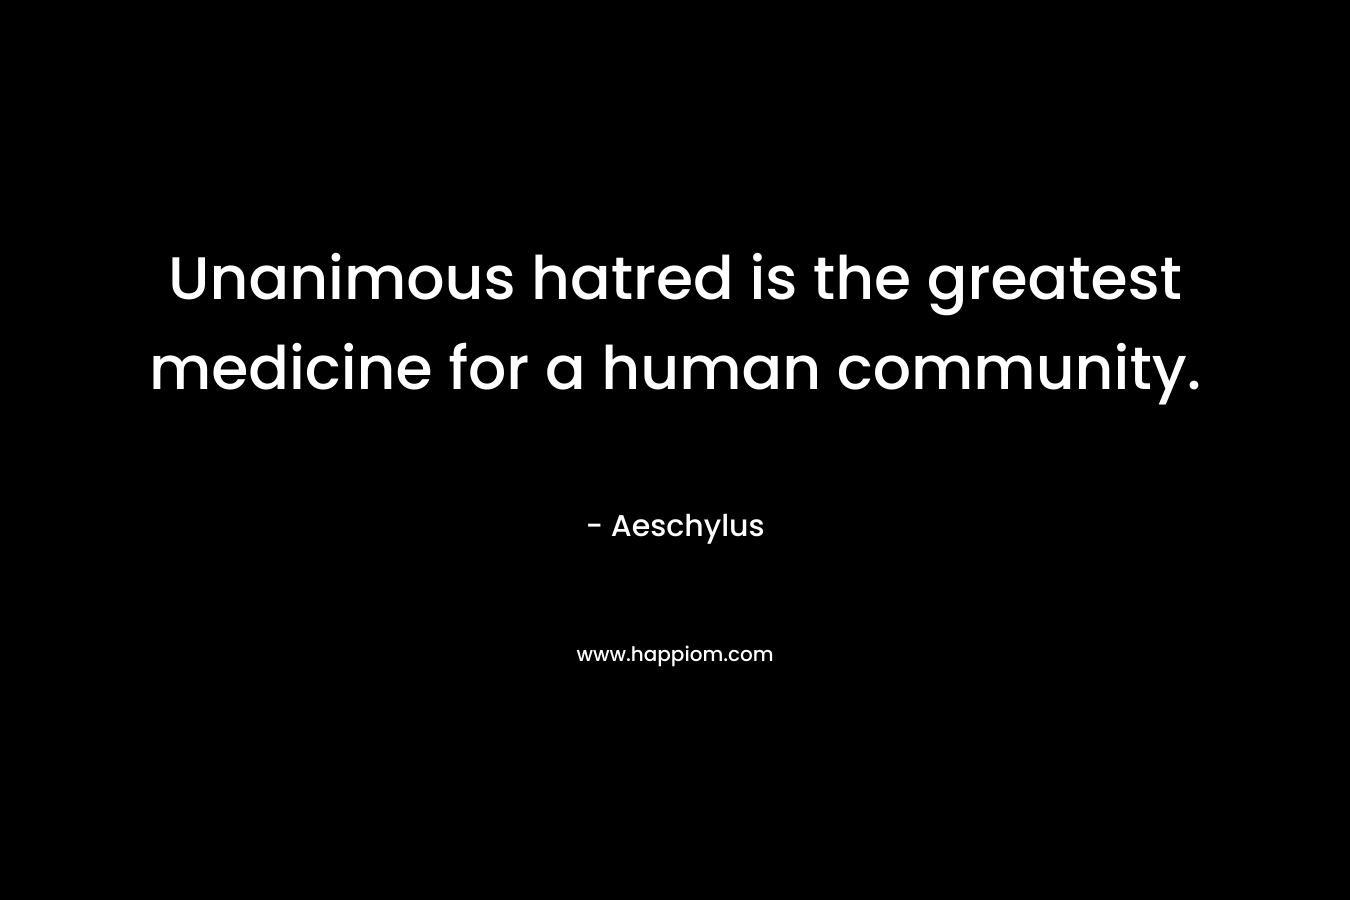 Unanimous hatred is the greatest medicine for a human community.